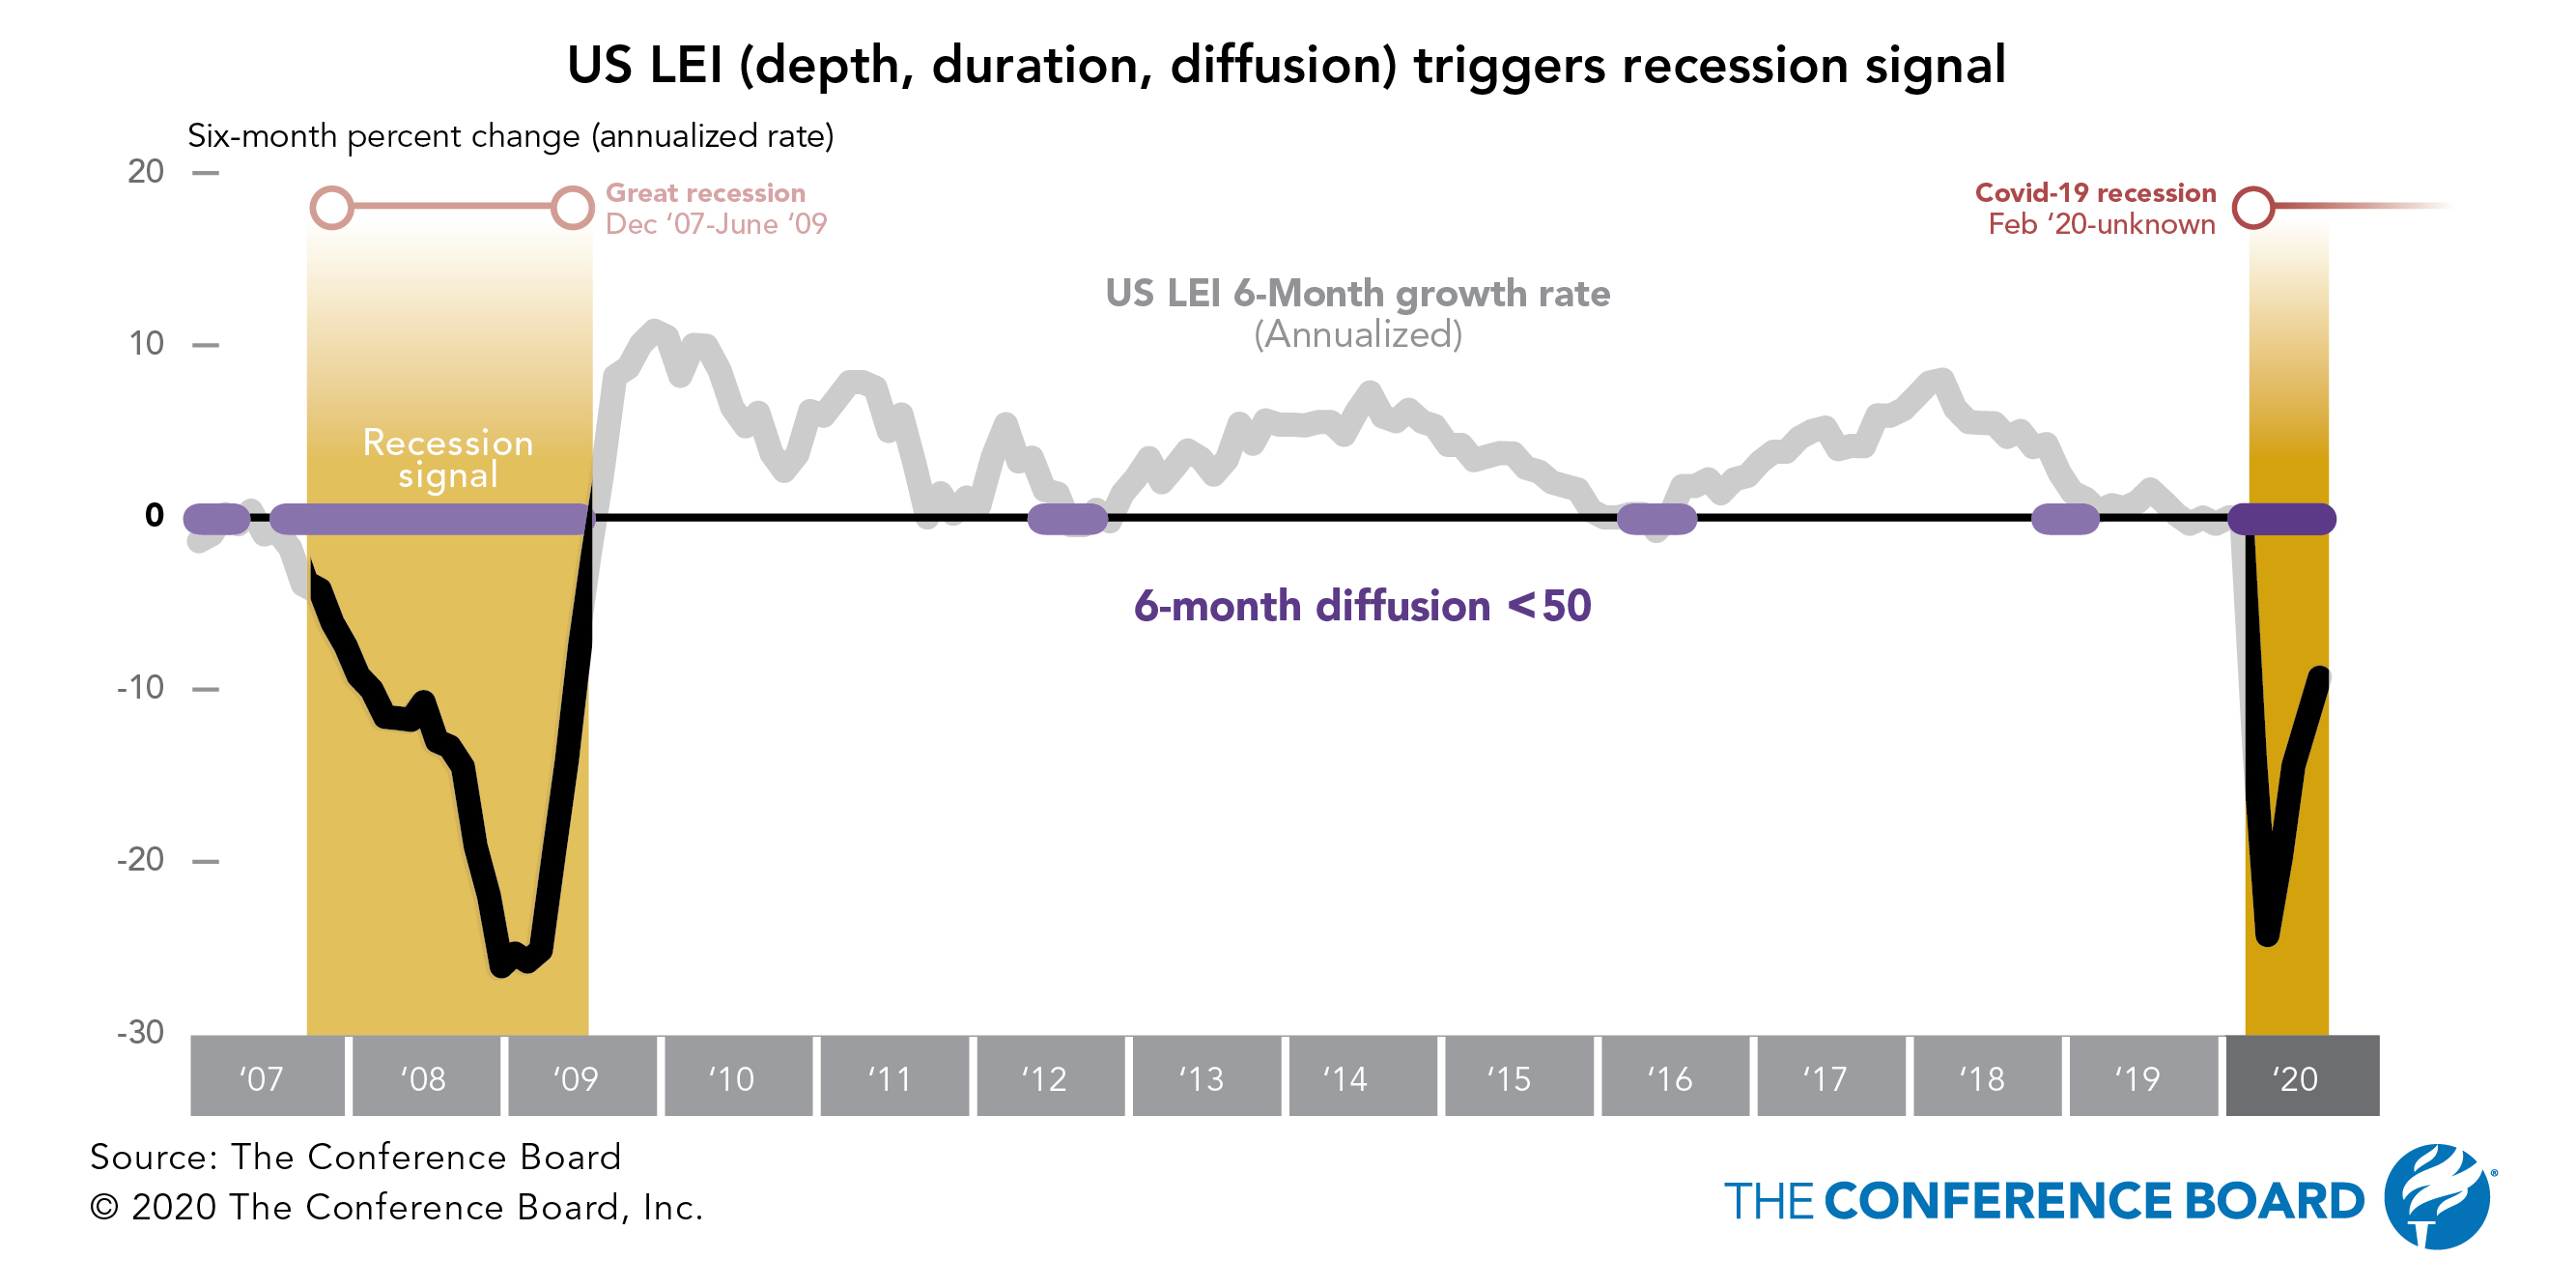 US LEI improving, but recession signal remains